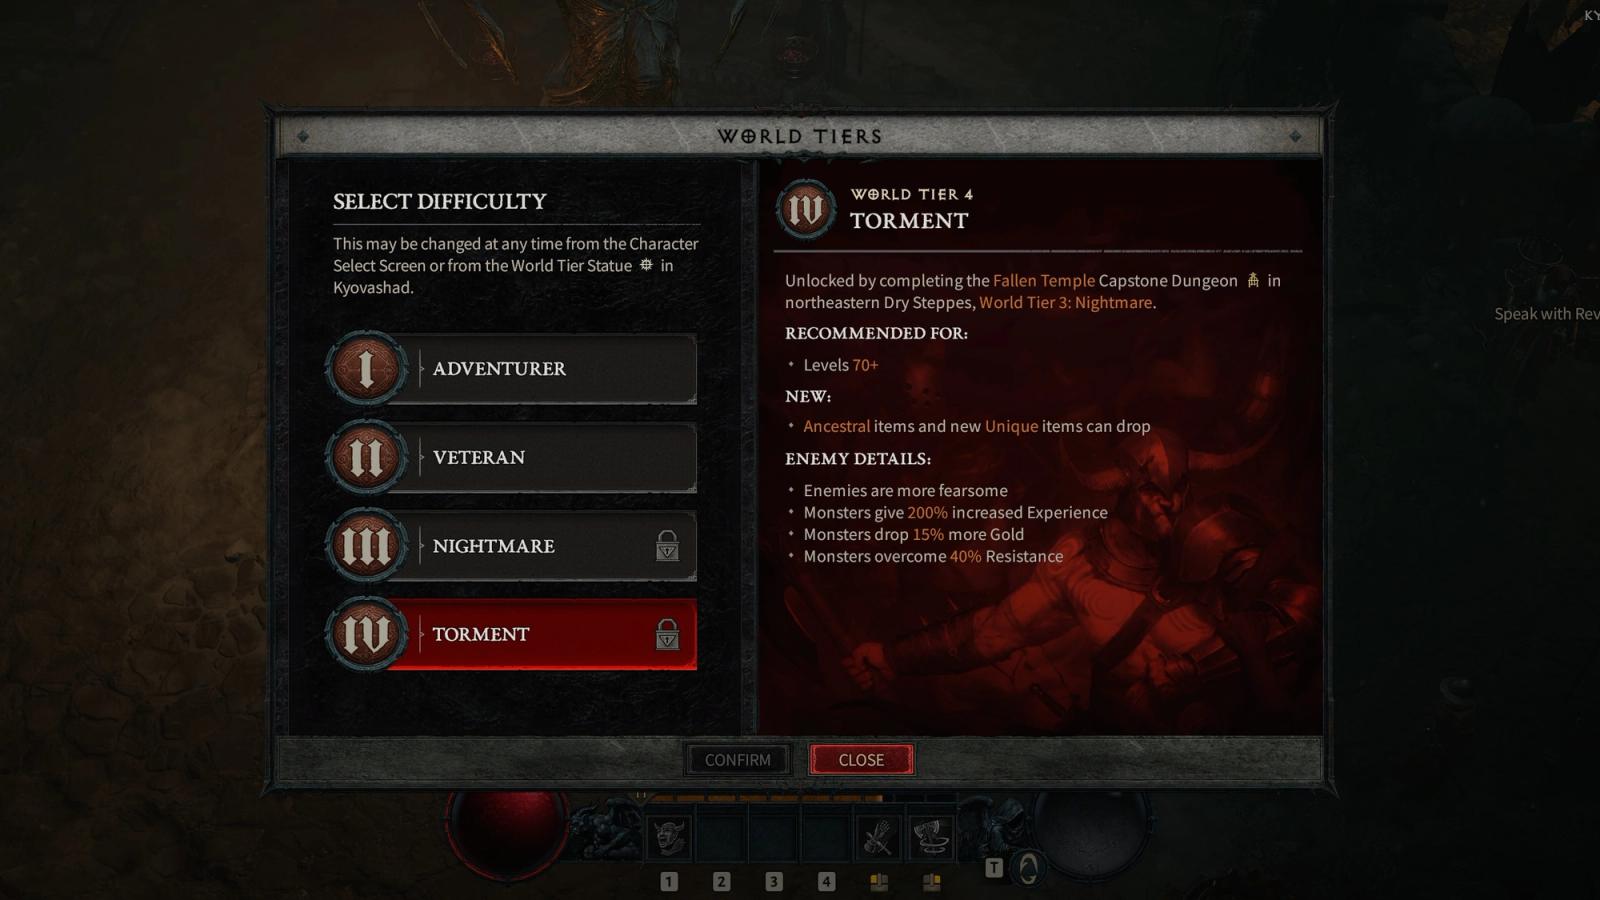 All of the World Tier options in Diablo 4's menu